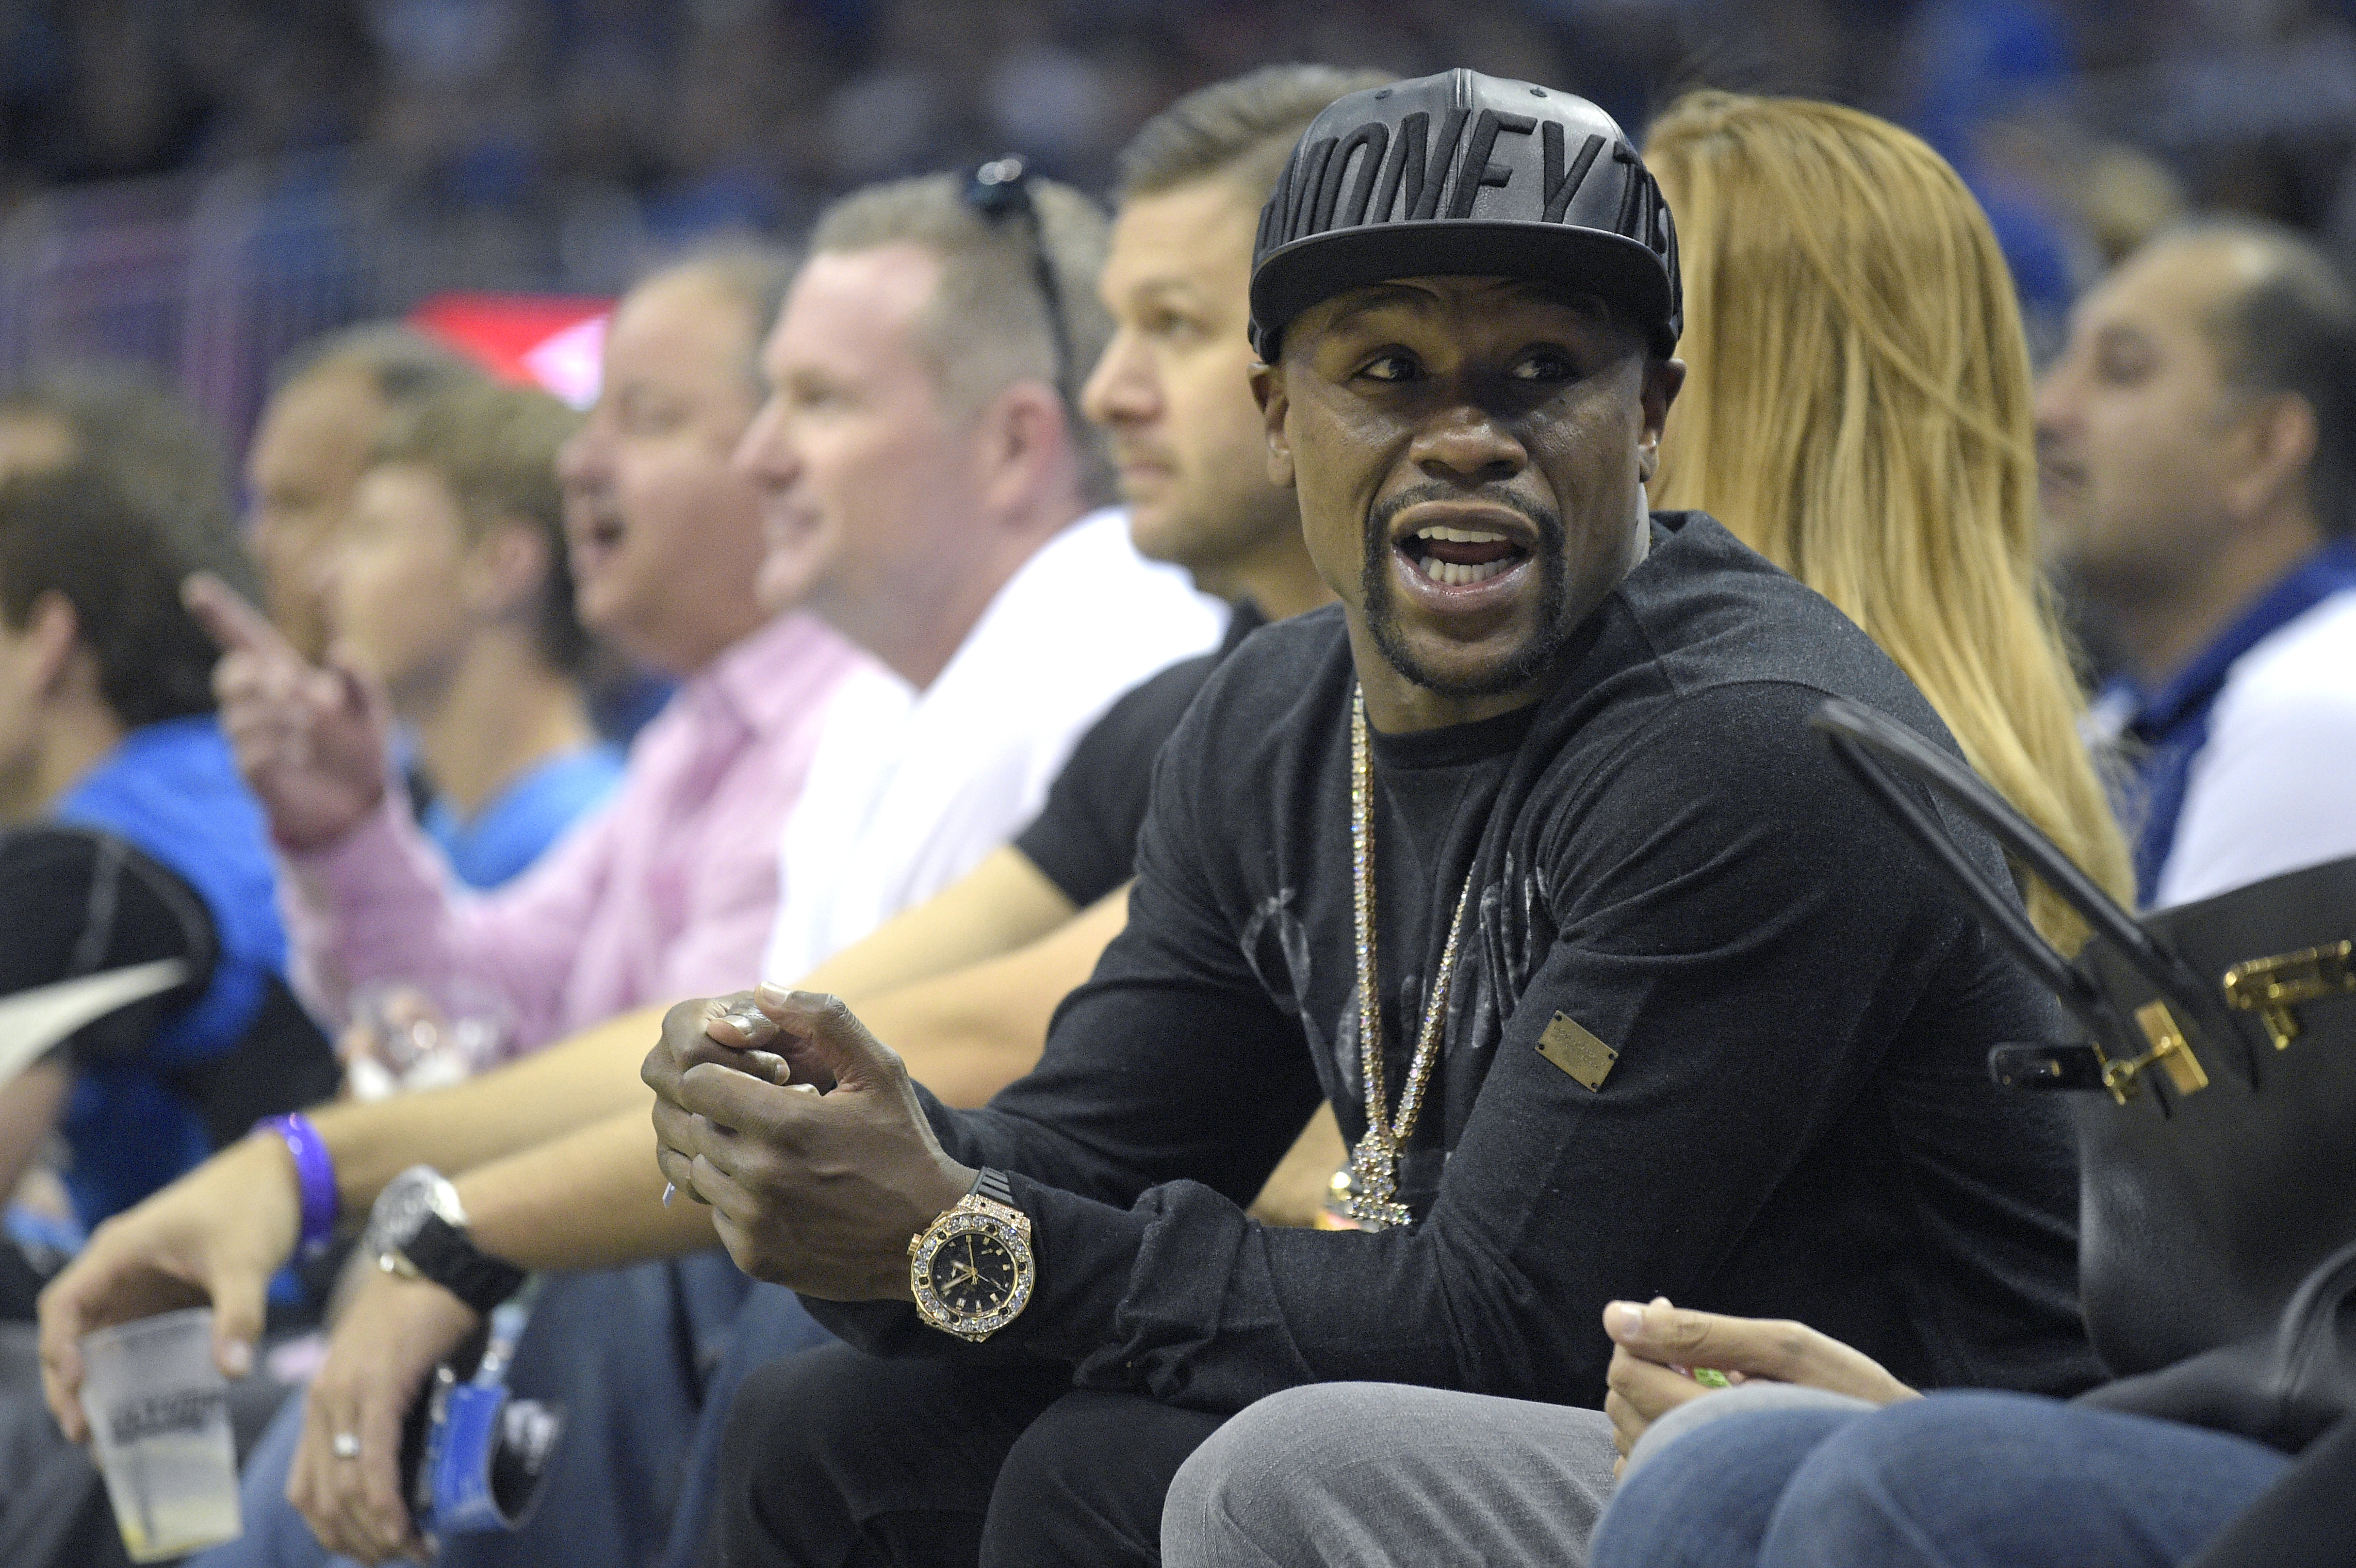 FILE - In this Oct. 30, 2015, file photo, boxer Floyd Mayweather Jr. talks to a fan while sitting court side during the first half of an NBA basketball game between the Orlando Magic and the Oklahoma City Thunder in Orlando, Fla. Mayweather Jr. wants attention more than he wants a fight. And, really, let's be truthful here. It wouldn't be much of a fight if Mayweather and Conor McGregor met in a boxing ring. (AP Photo/Phelan M. Ebenhack, File)